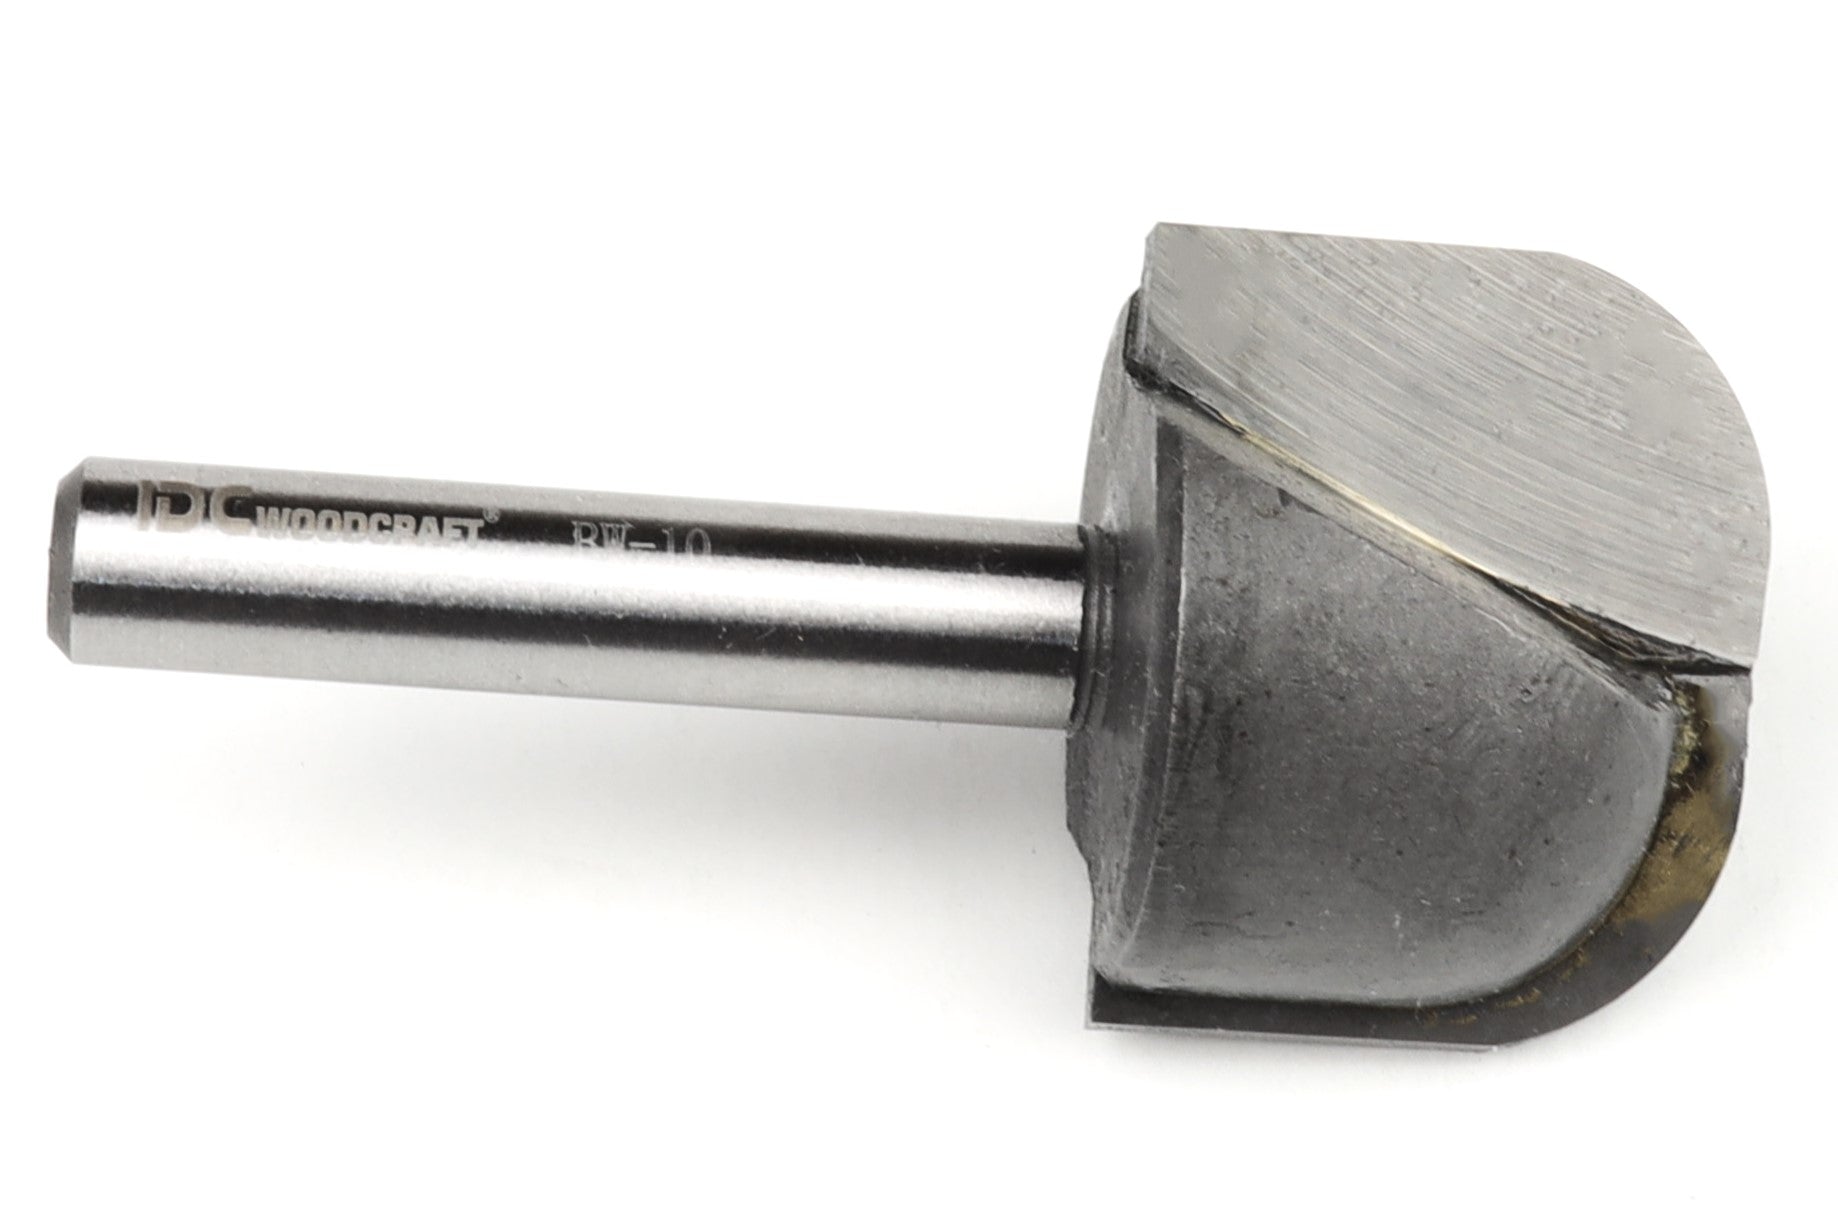 1" Bowl Bit For CNC Routers, 1/4" Shank, The Serious Bit!